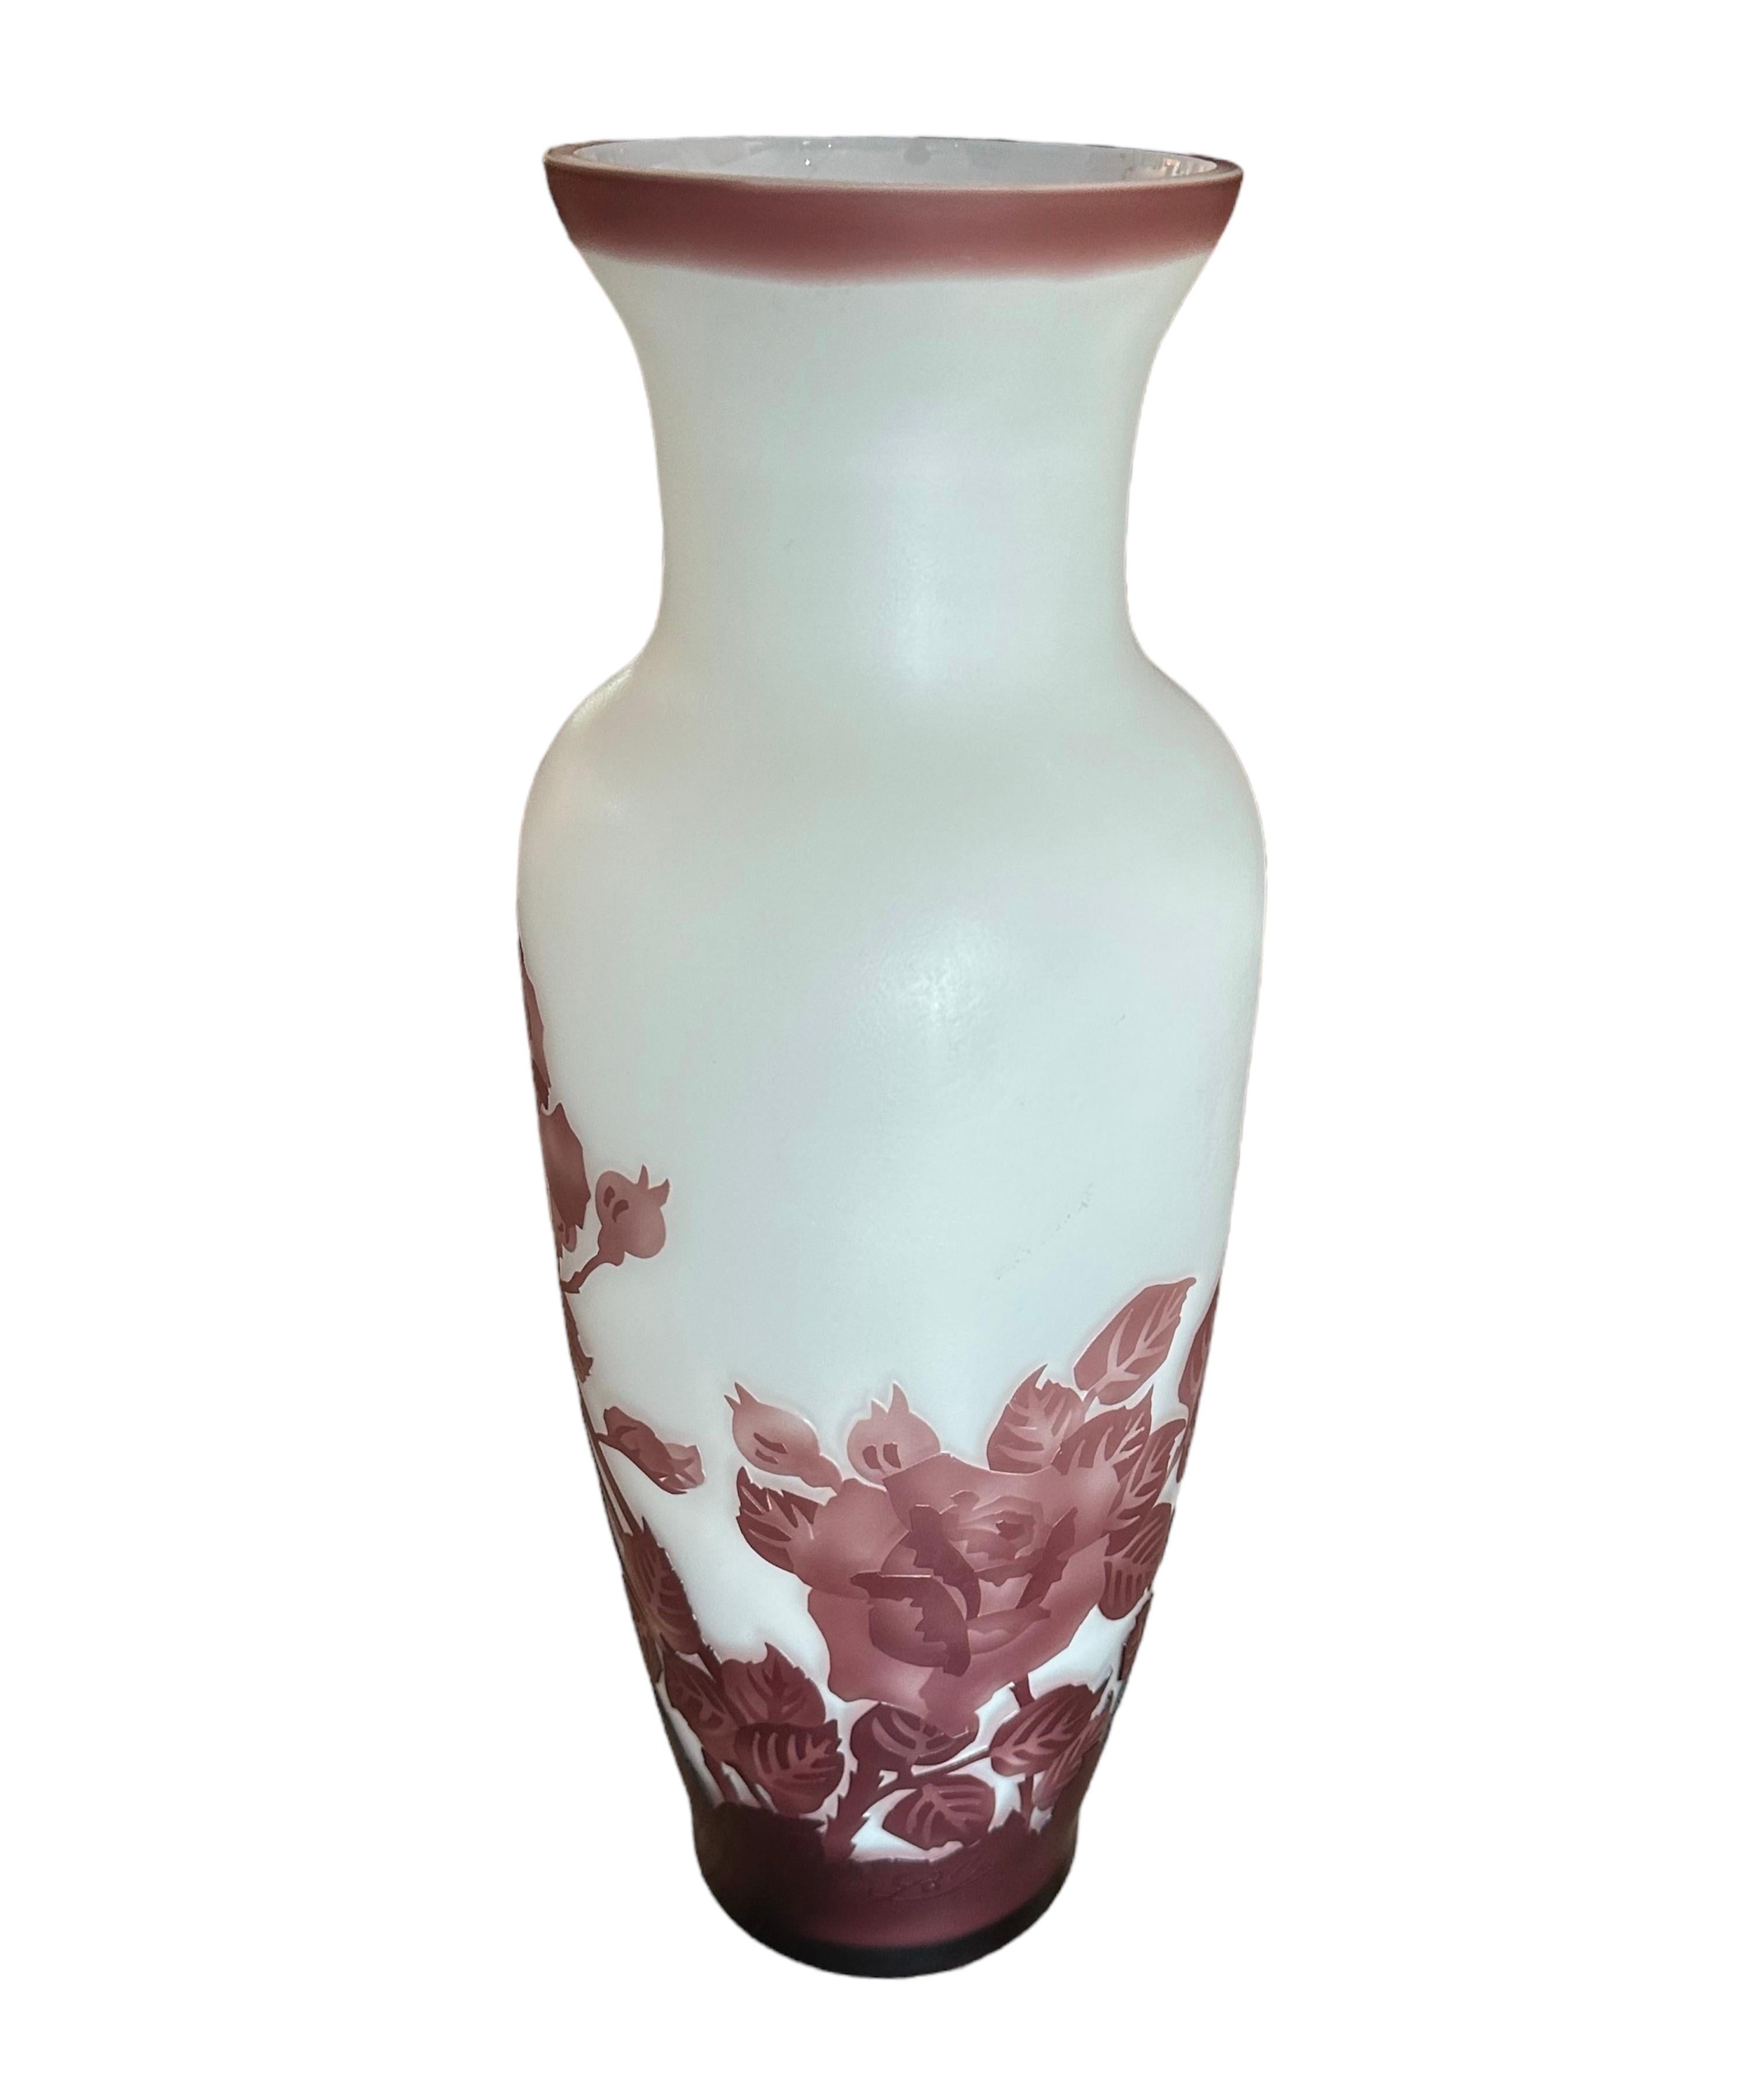 This is truly a beautiful vase,signed by Galle elegant and heavy and weight, smooth to the touch, but the roses are etched onto the glass, has an extraordinary feel in the colors of the burgundy towards the bottom, get richer and deeper, and as the